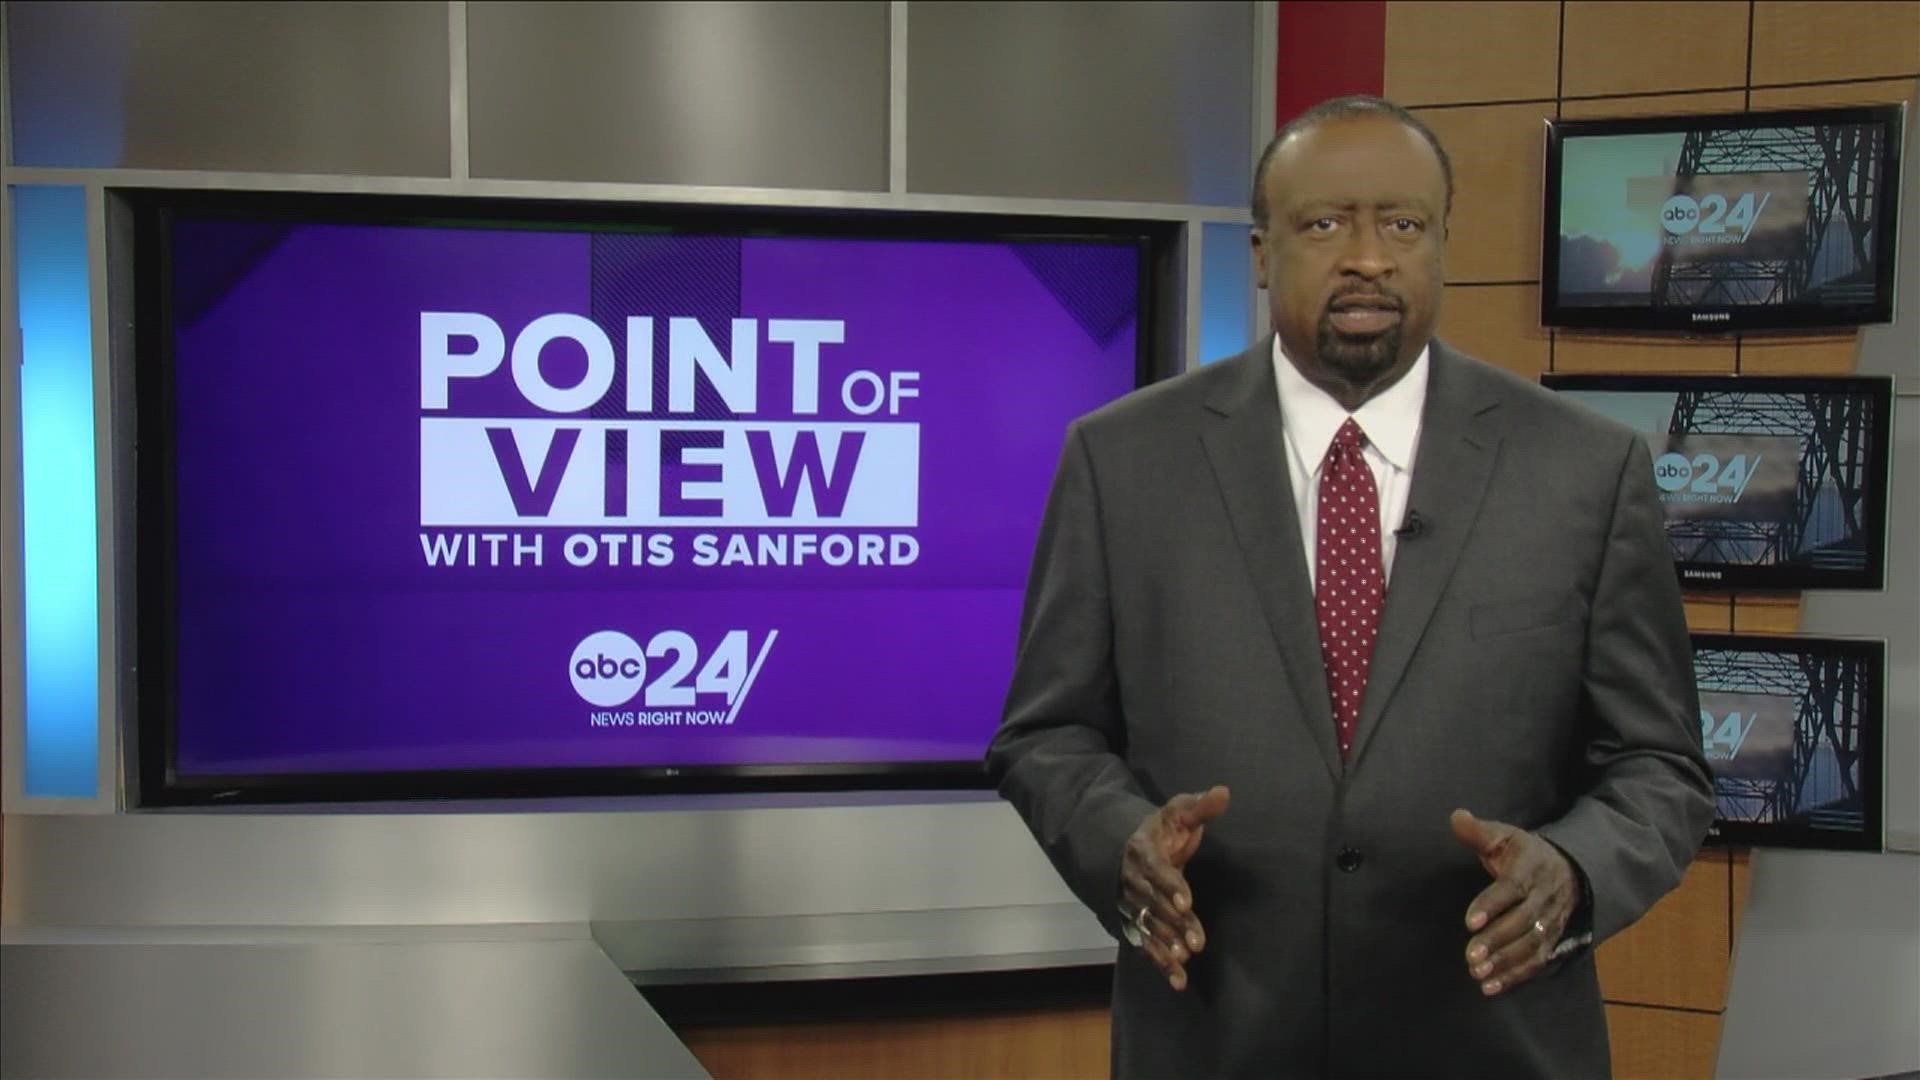 ABC24 political analyst and commentator Otis Sanford shared his point of view on the race for Shelby County Clerk.